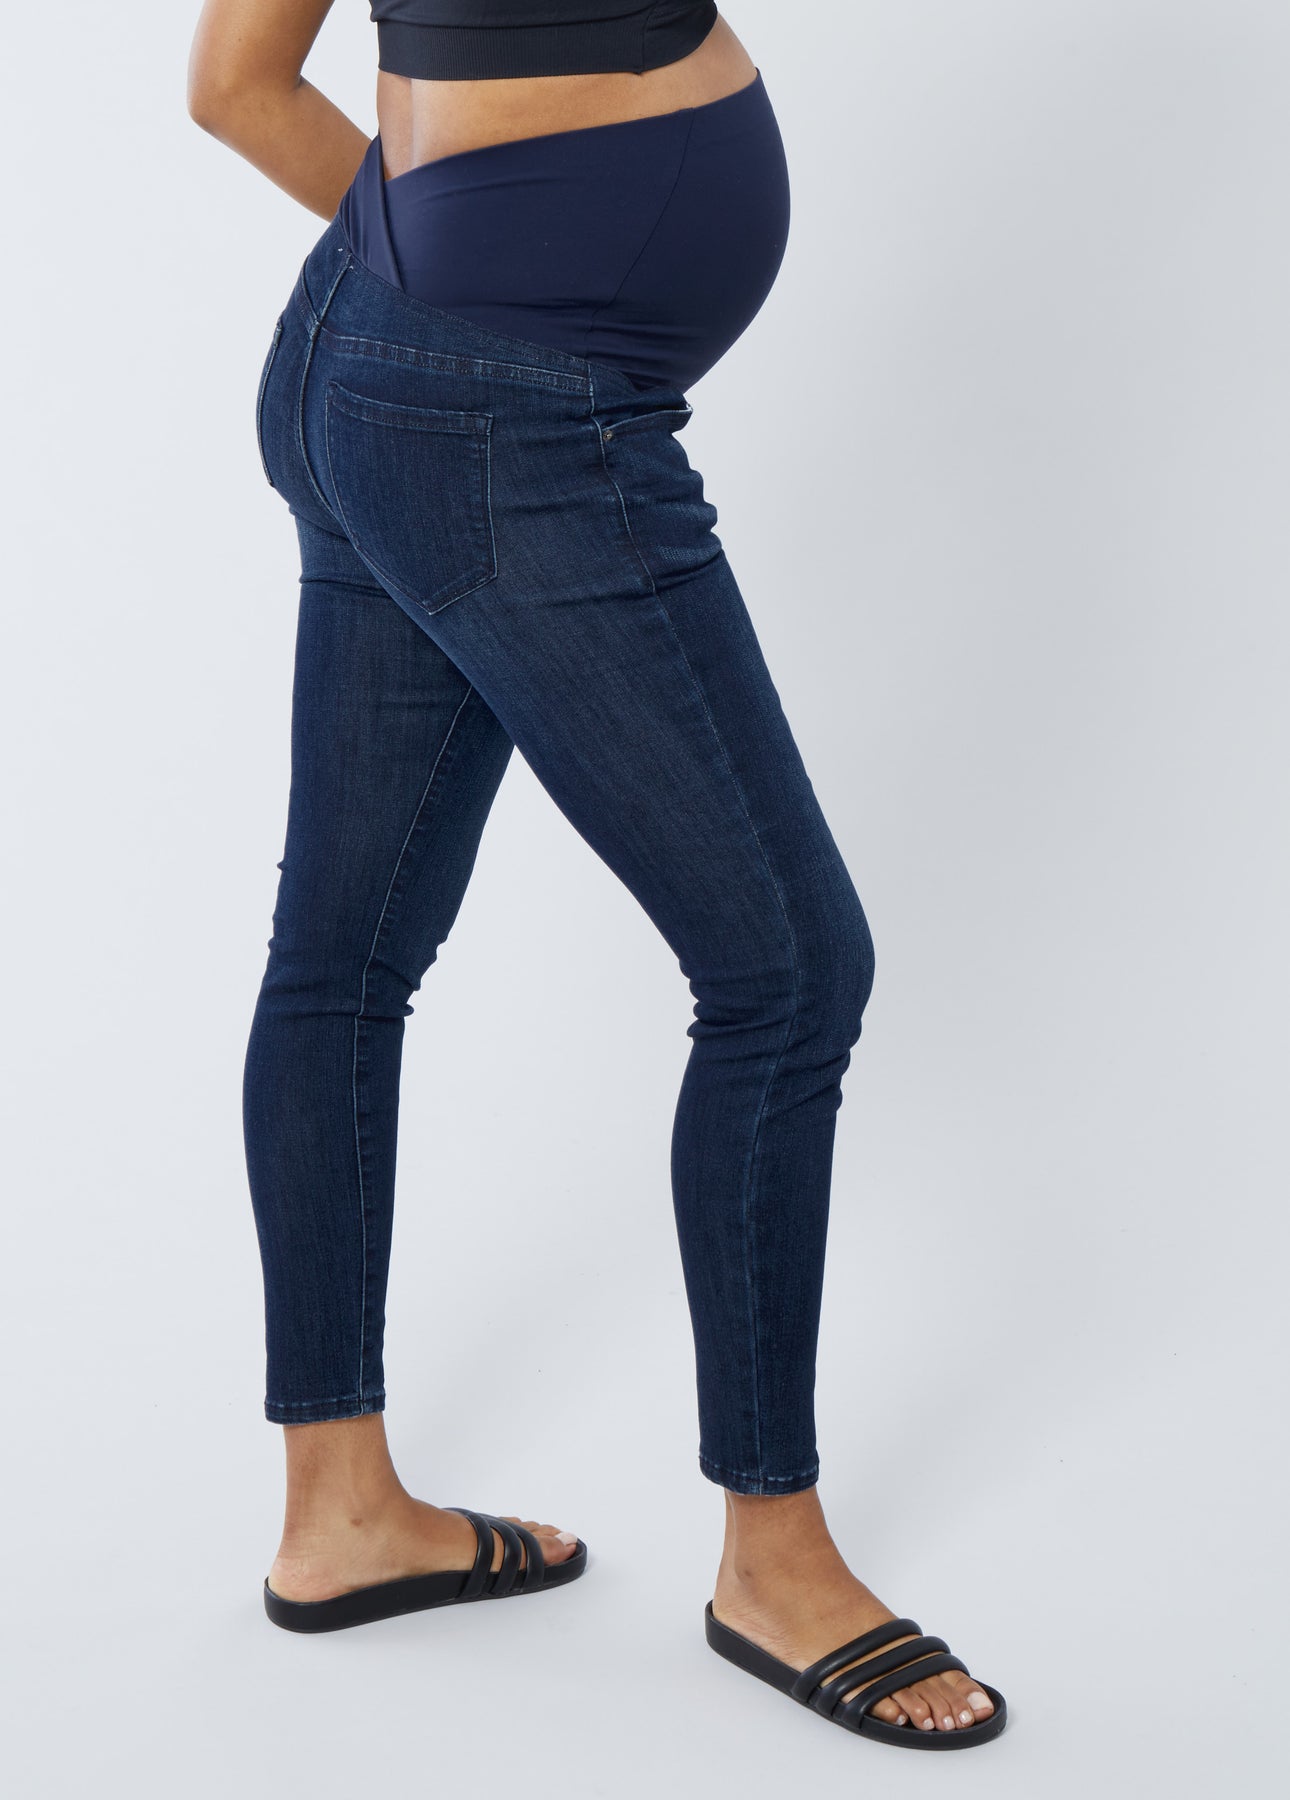 Over Belly Skinny Maternity Pants - Isabel Maternity By Ingrid